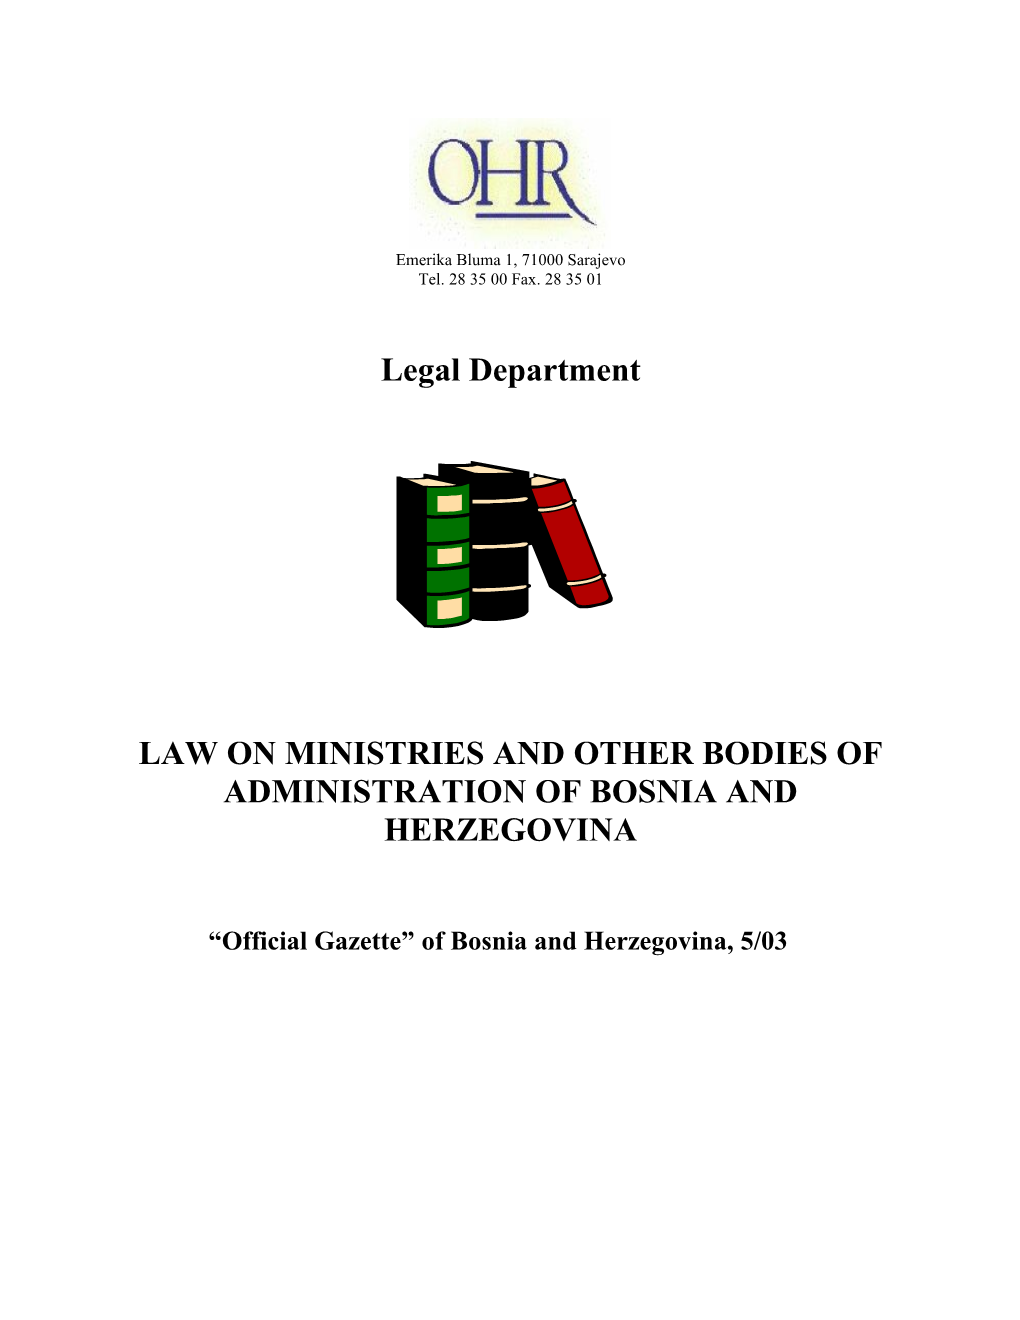 Law on Ministries and Other Bodies of Administration of Bosnia and Herzegovina